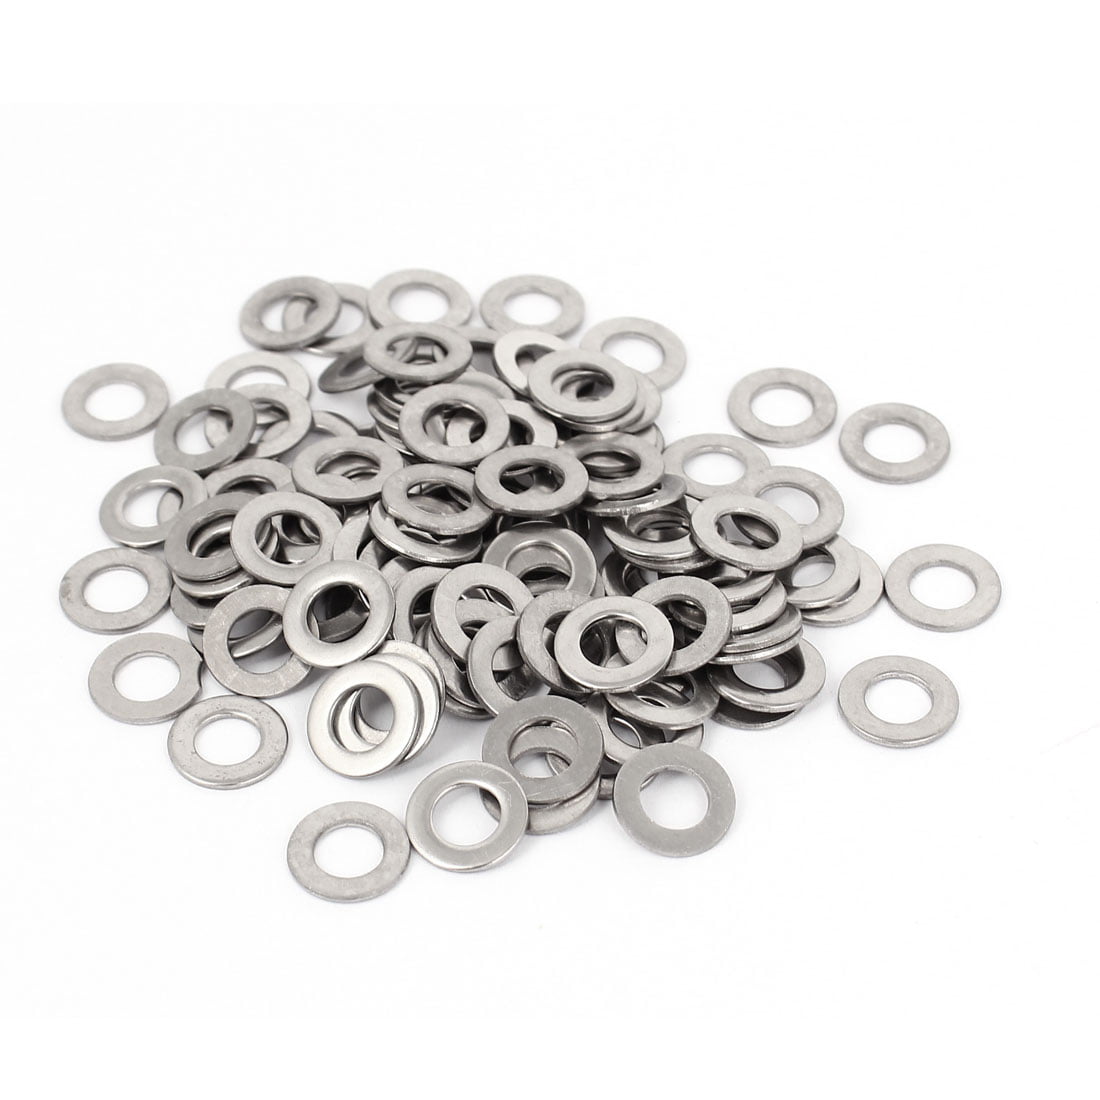 5 M6 Metric Stainless Steel EXTRA THICK HEAVY DUTY 6mm Flat Washers 